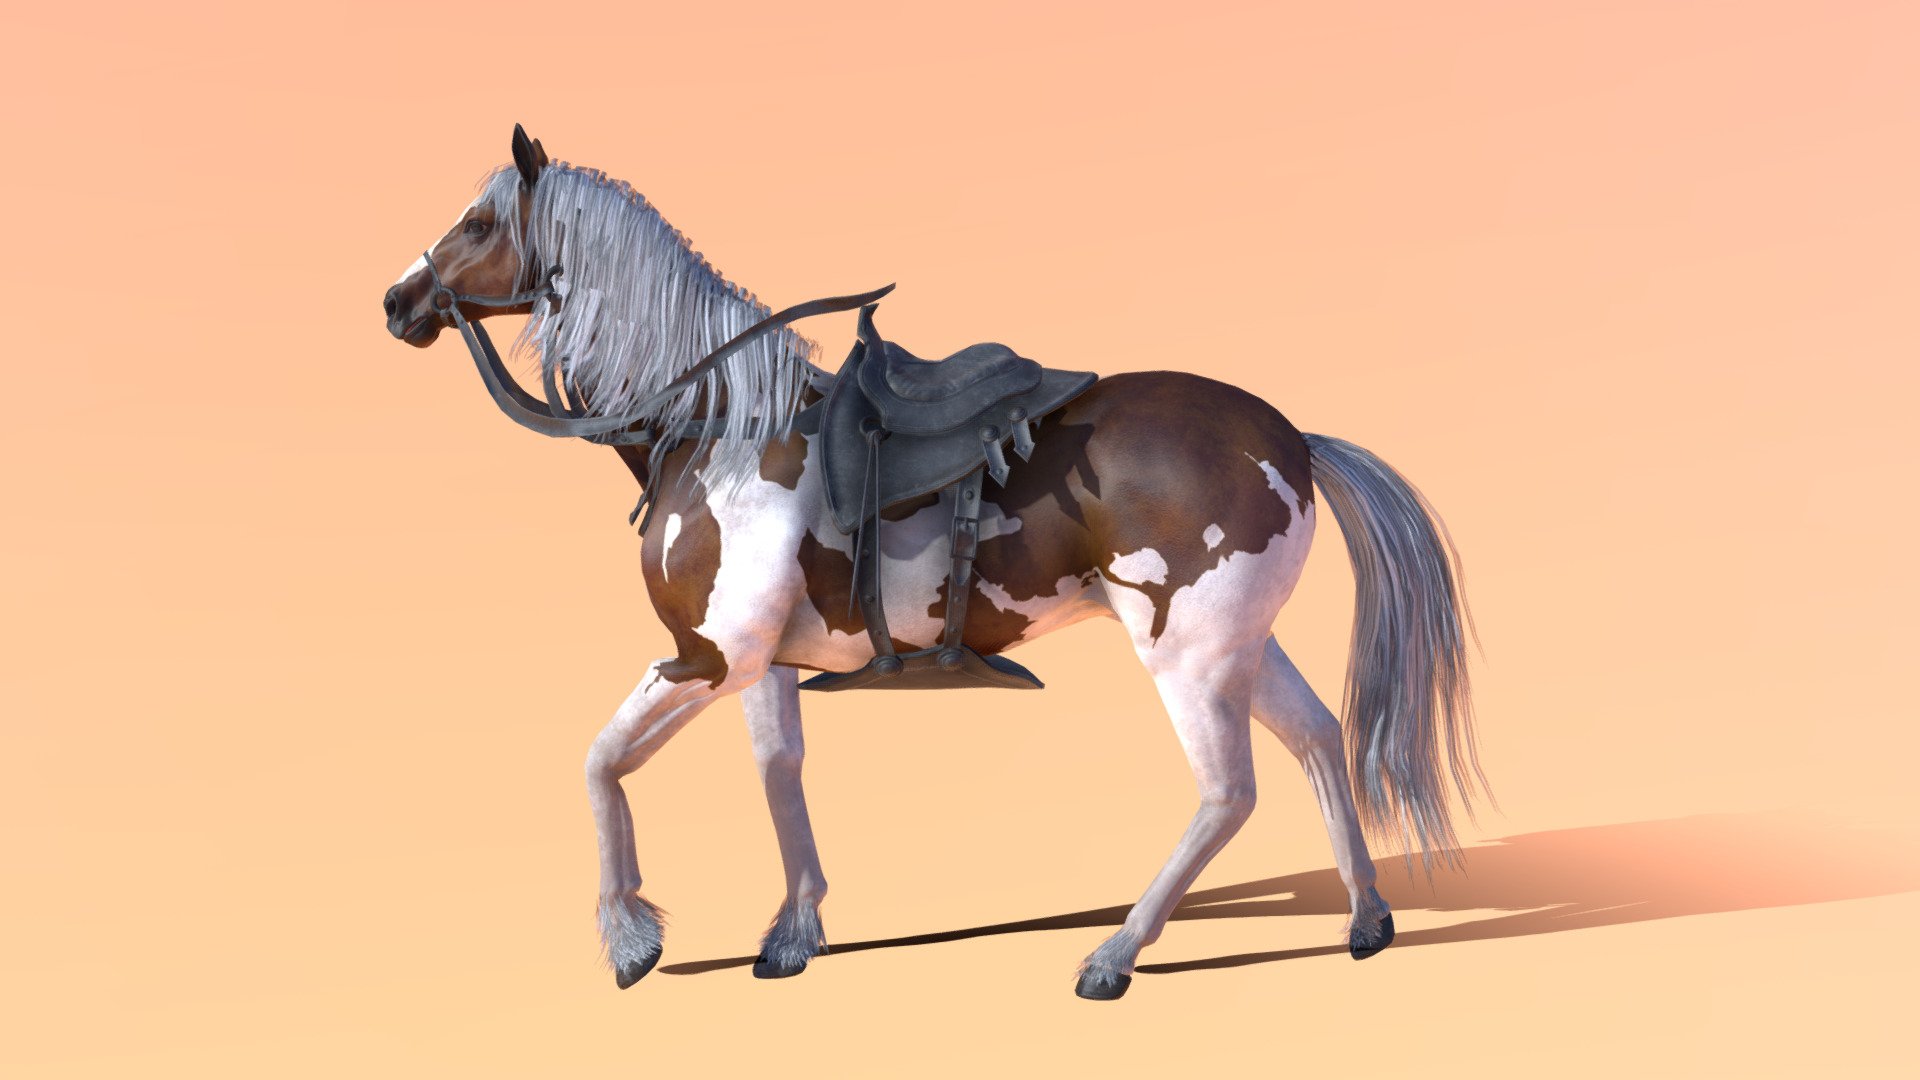 Horse Walkcycle animated
in fbx file format - Horse Walkcycle animated - 3D model by monstermod 3d model